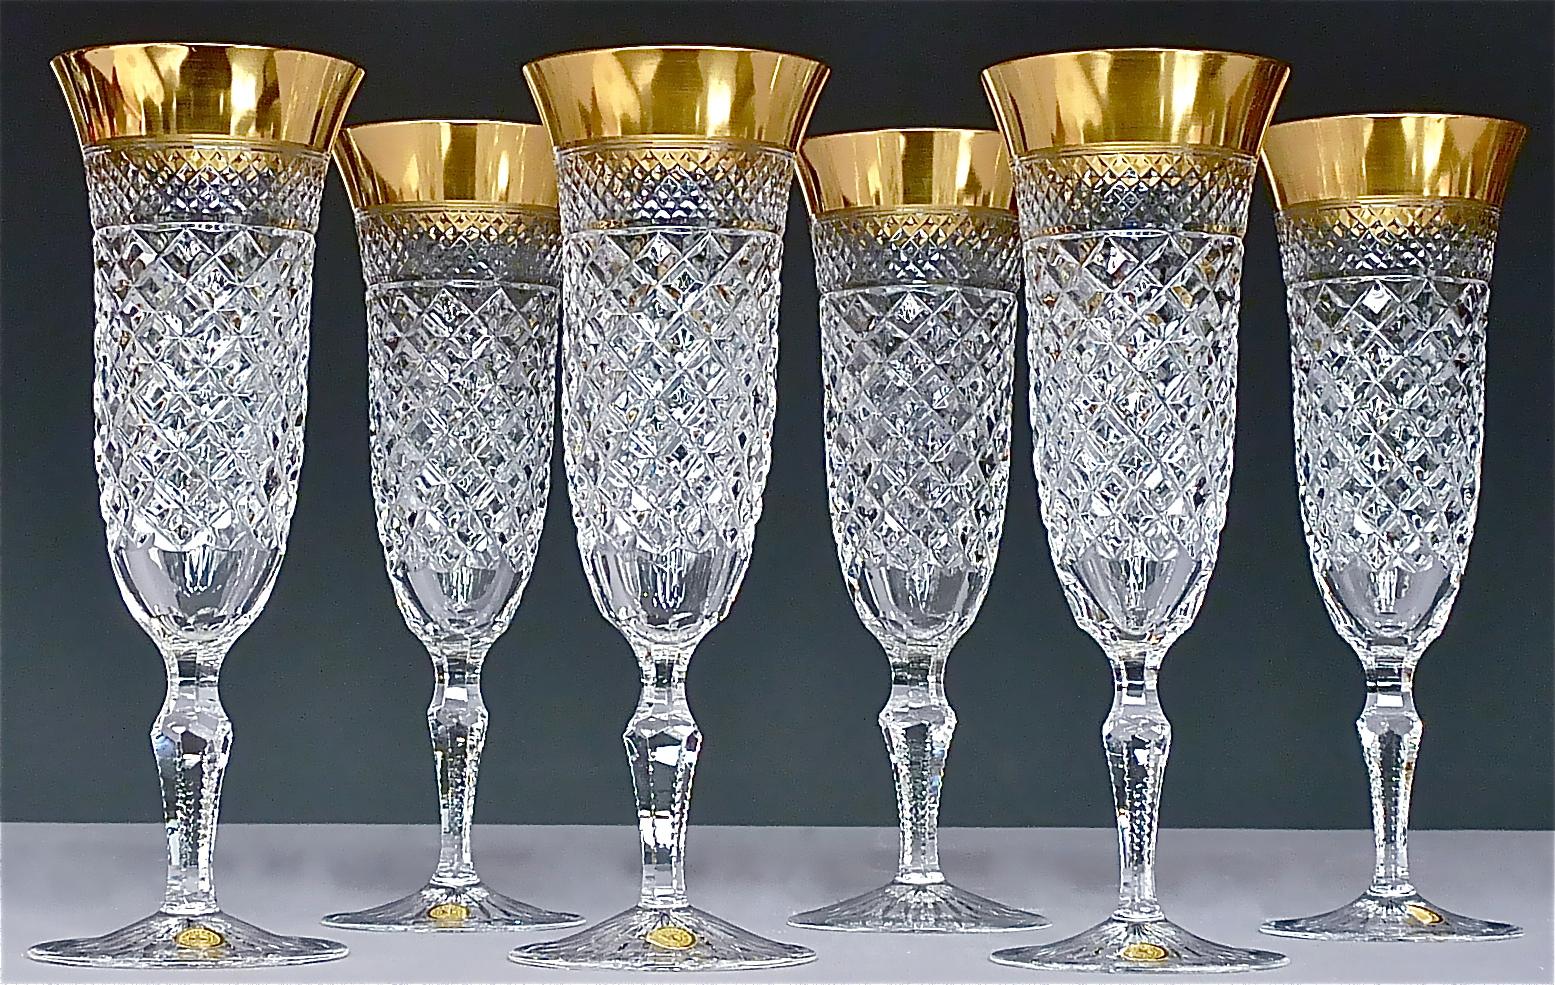 Gorgeous 20th century handcrafted faceted crystal glass set with 24 carat gold rim made by Josephinenhütte Moser circa 1960-1970 and very in the style of the exclusive french company Baccarat or Saint Louis thistle. This exquisite set of 6 champagne